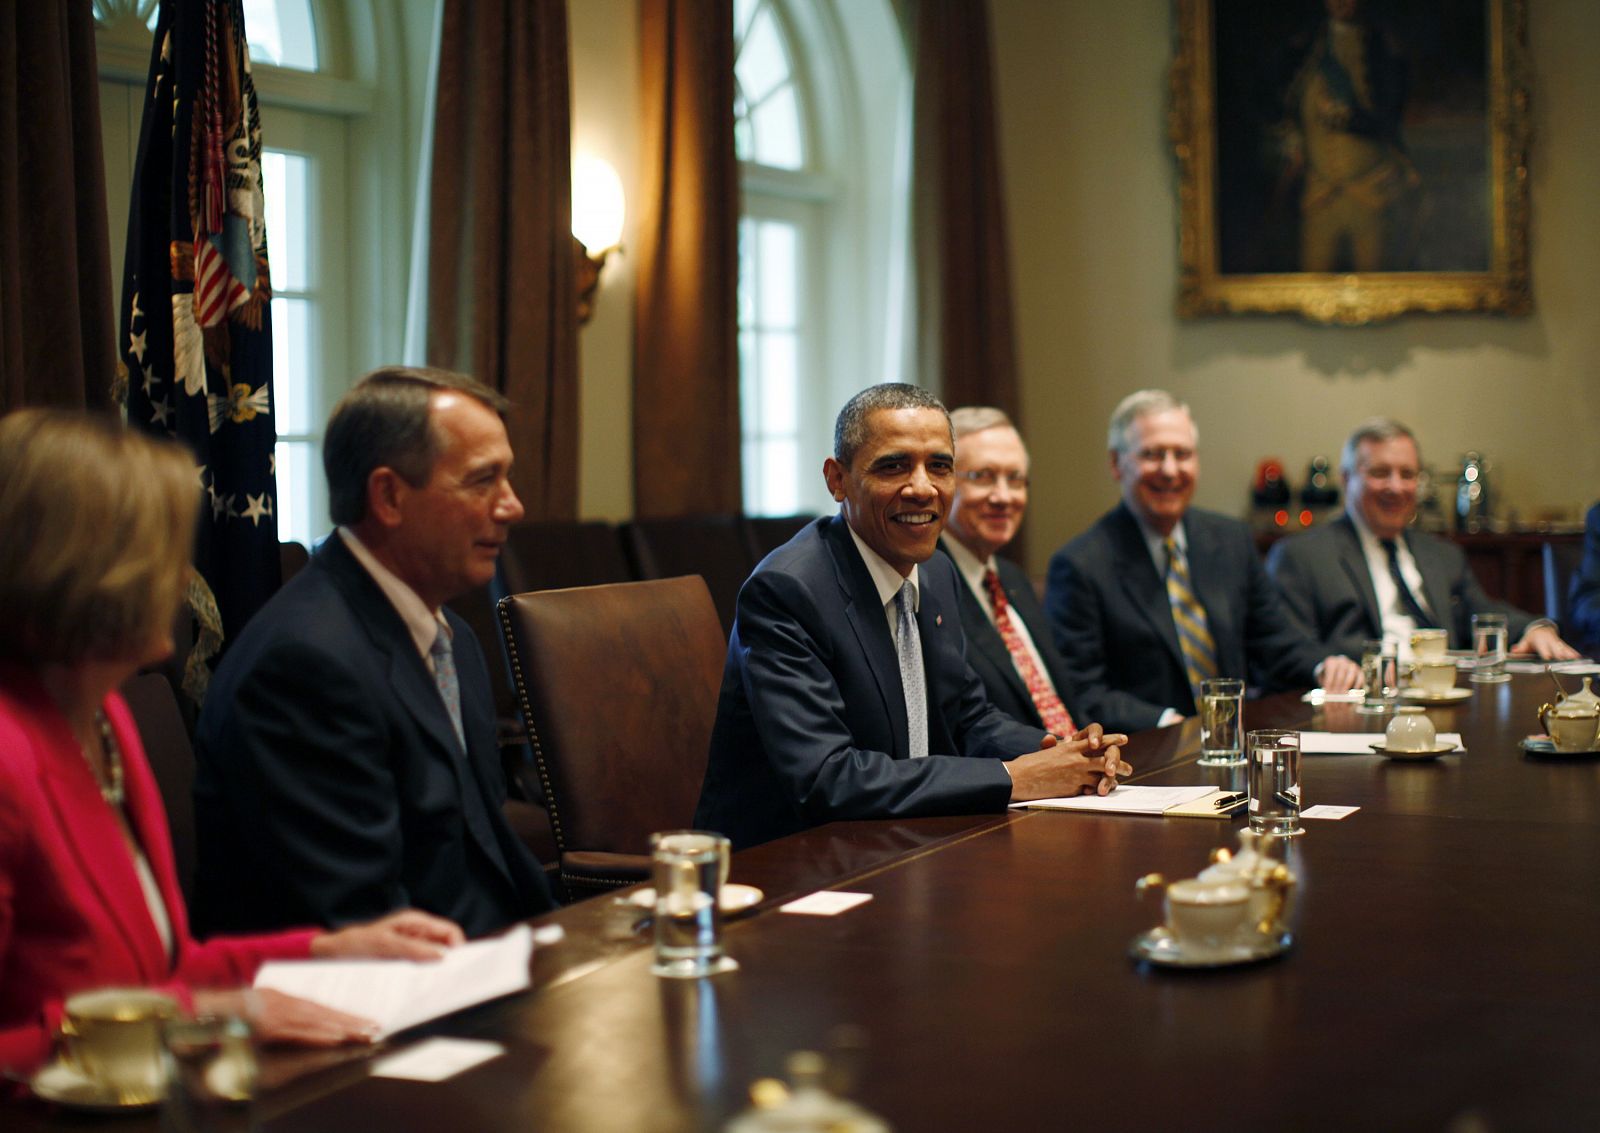 U.S. President Barack Obama conducts a meeting on deficit reduction in Washington